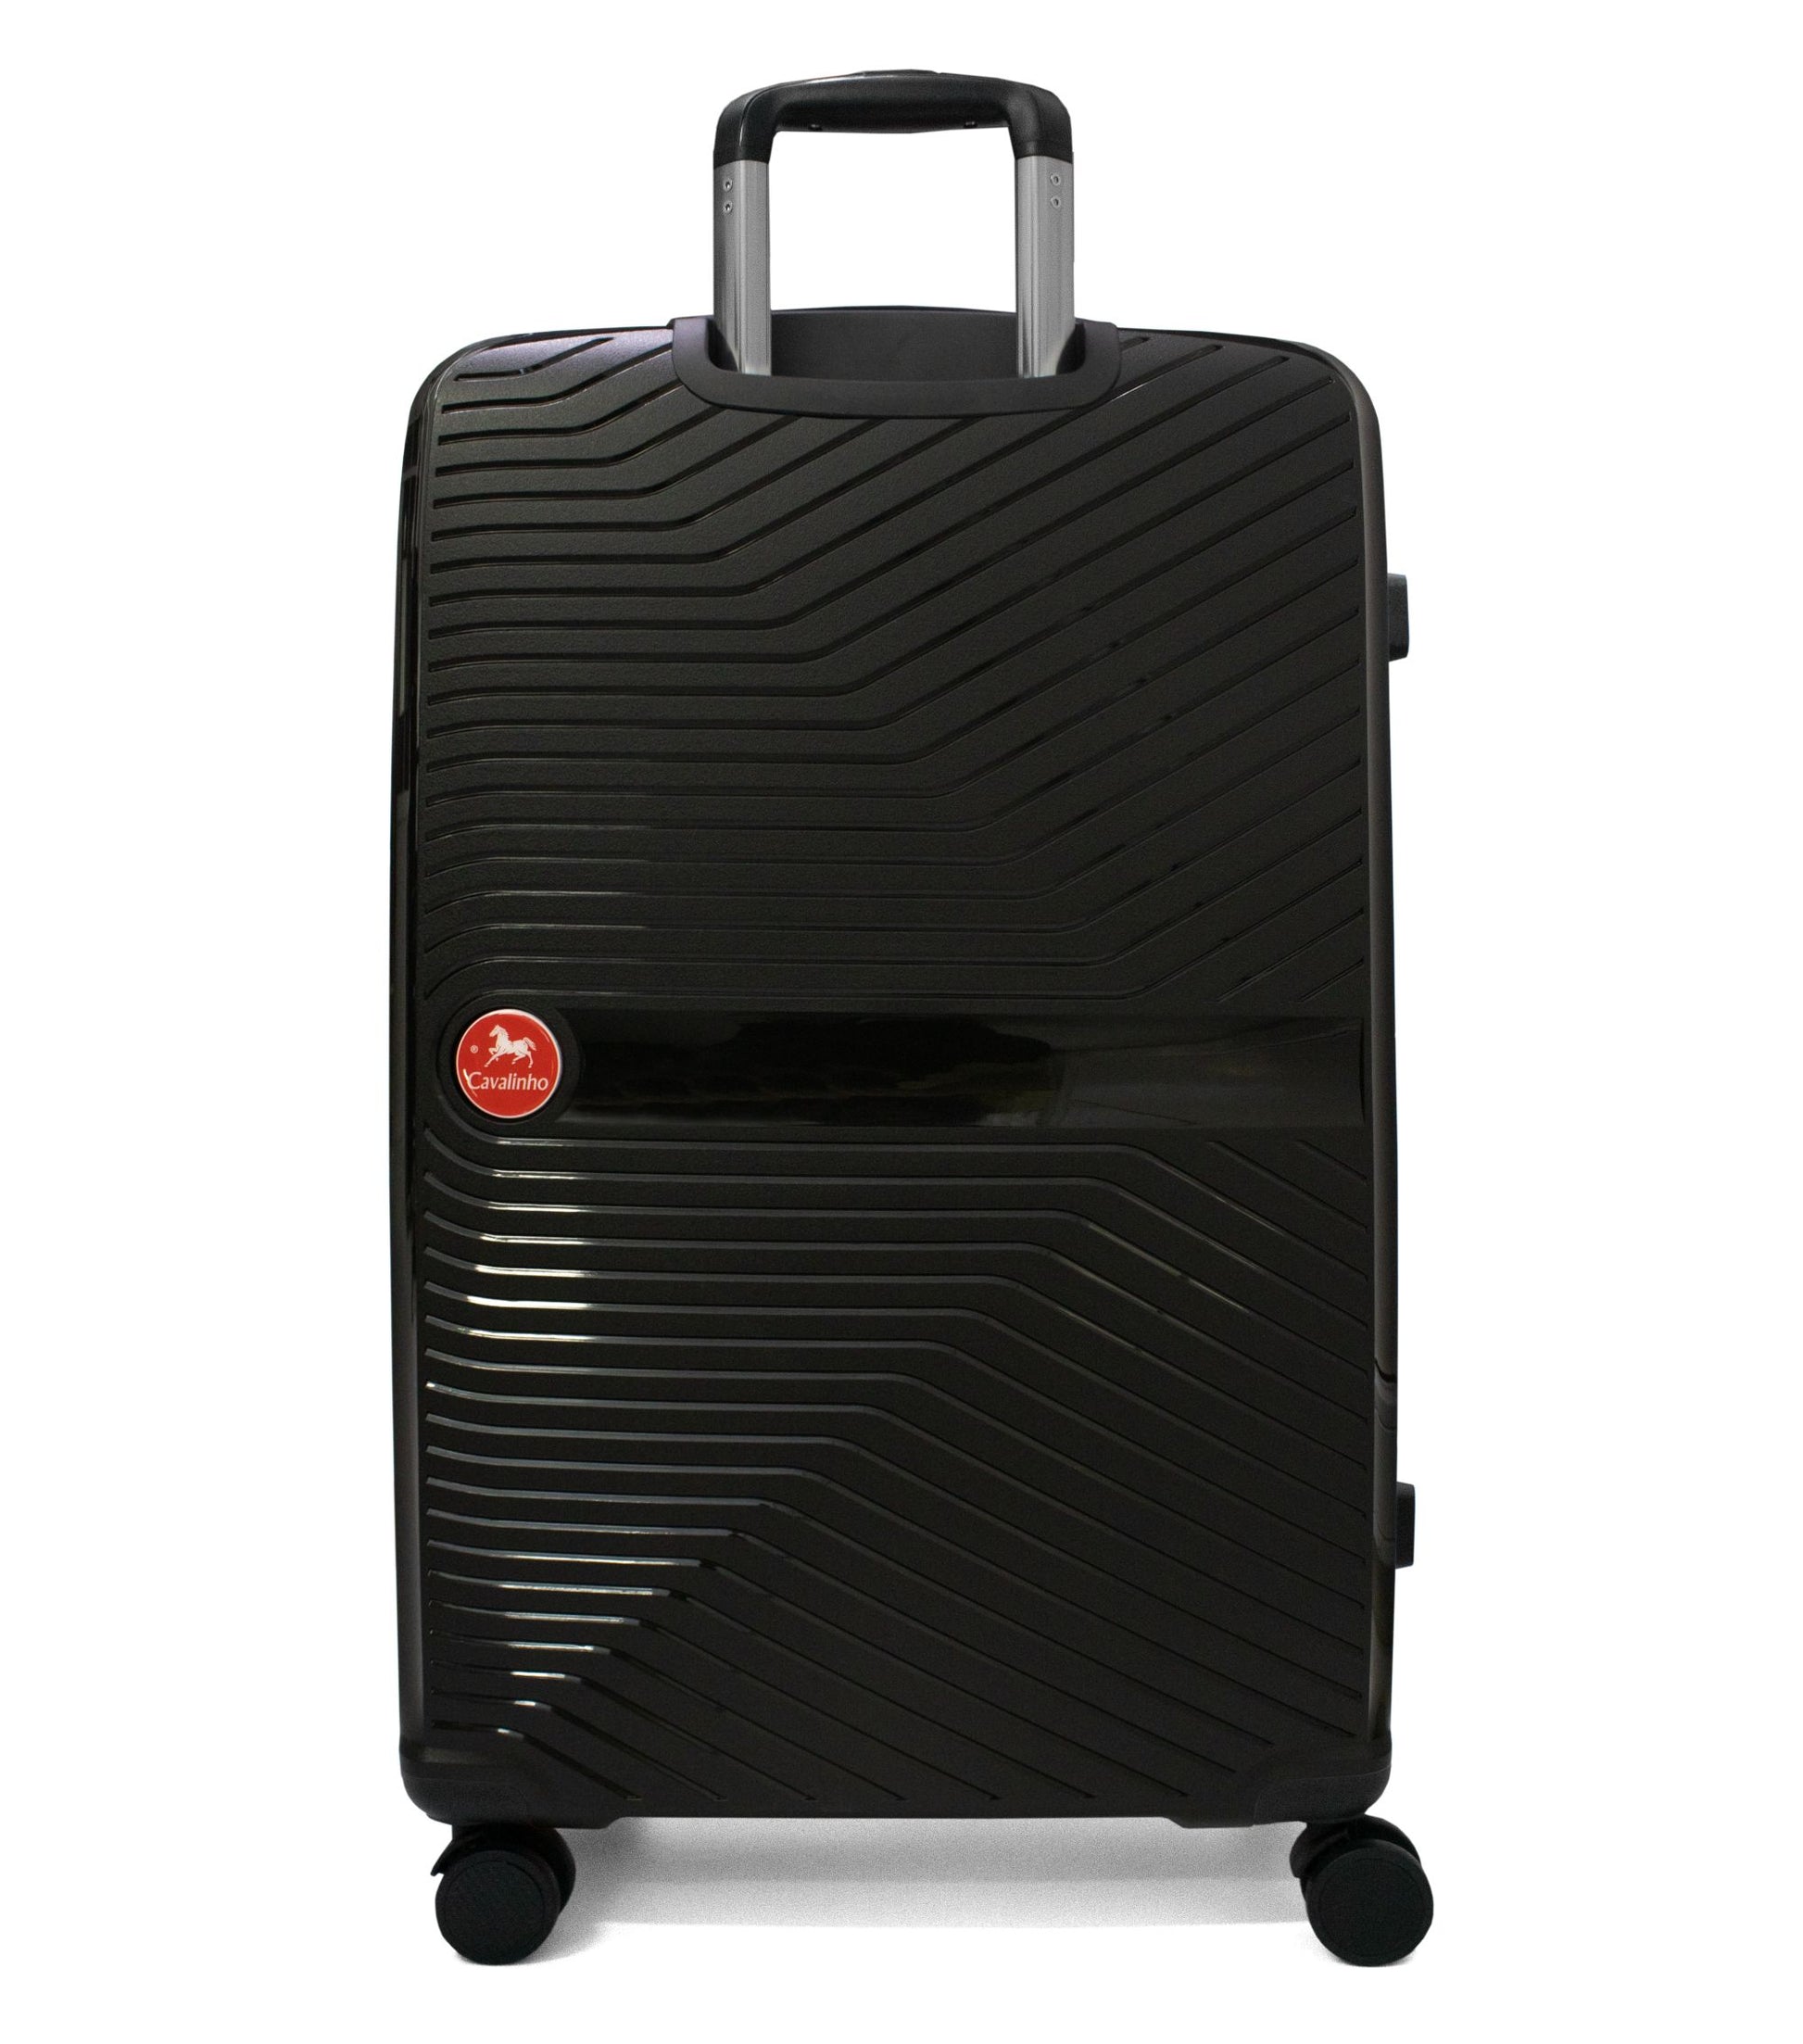 Cavalinho Colorful Check-in Hardside Luggage (28") - 28 inch Black - 68020004.01.28_3